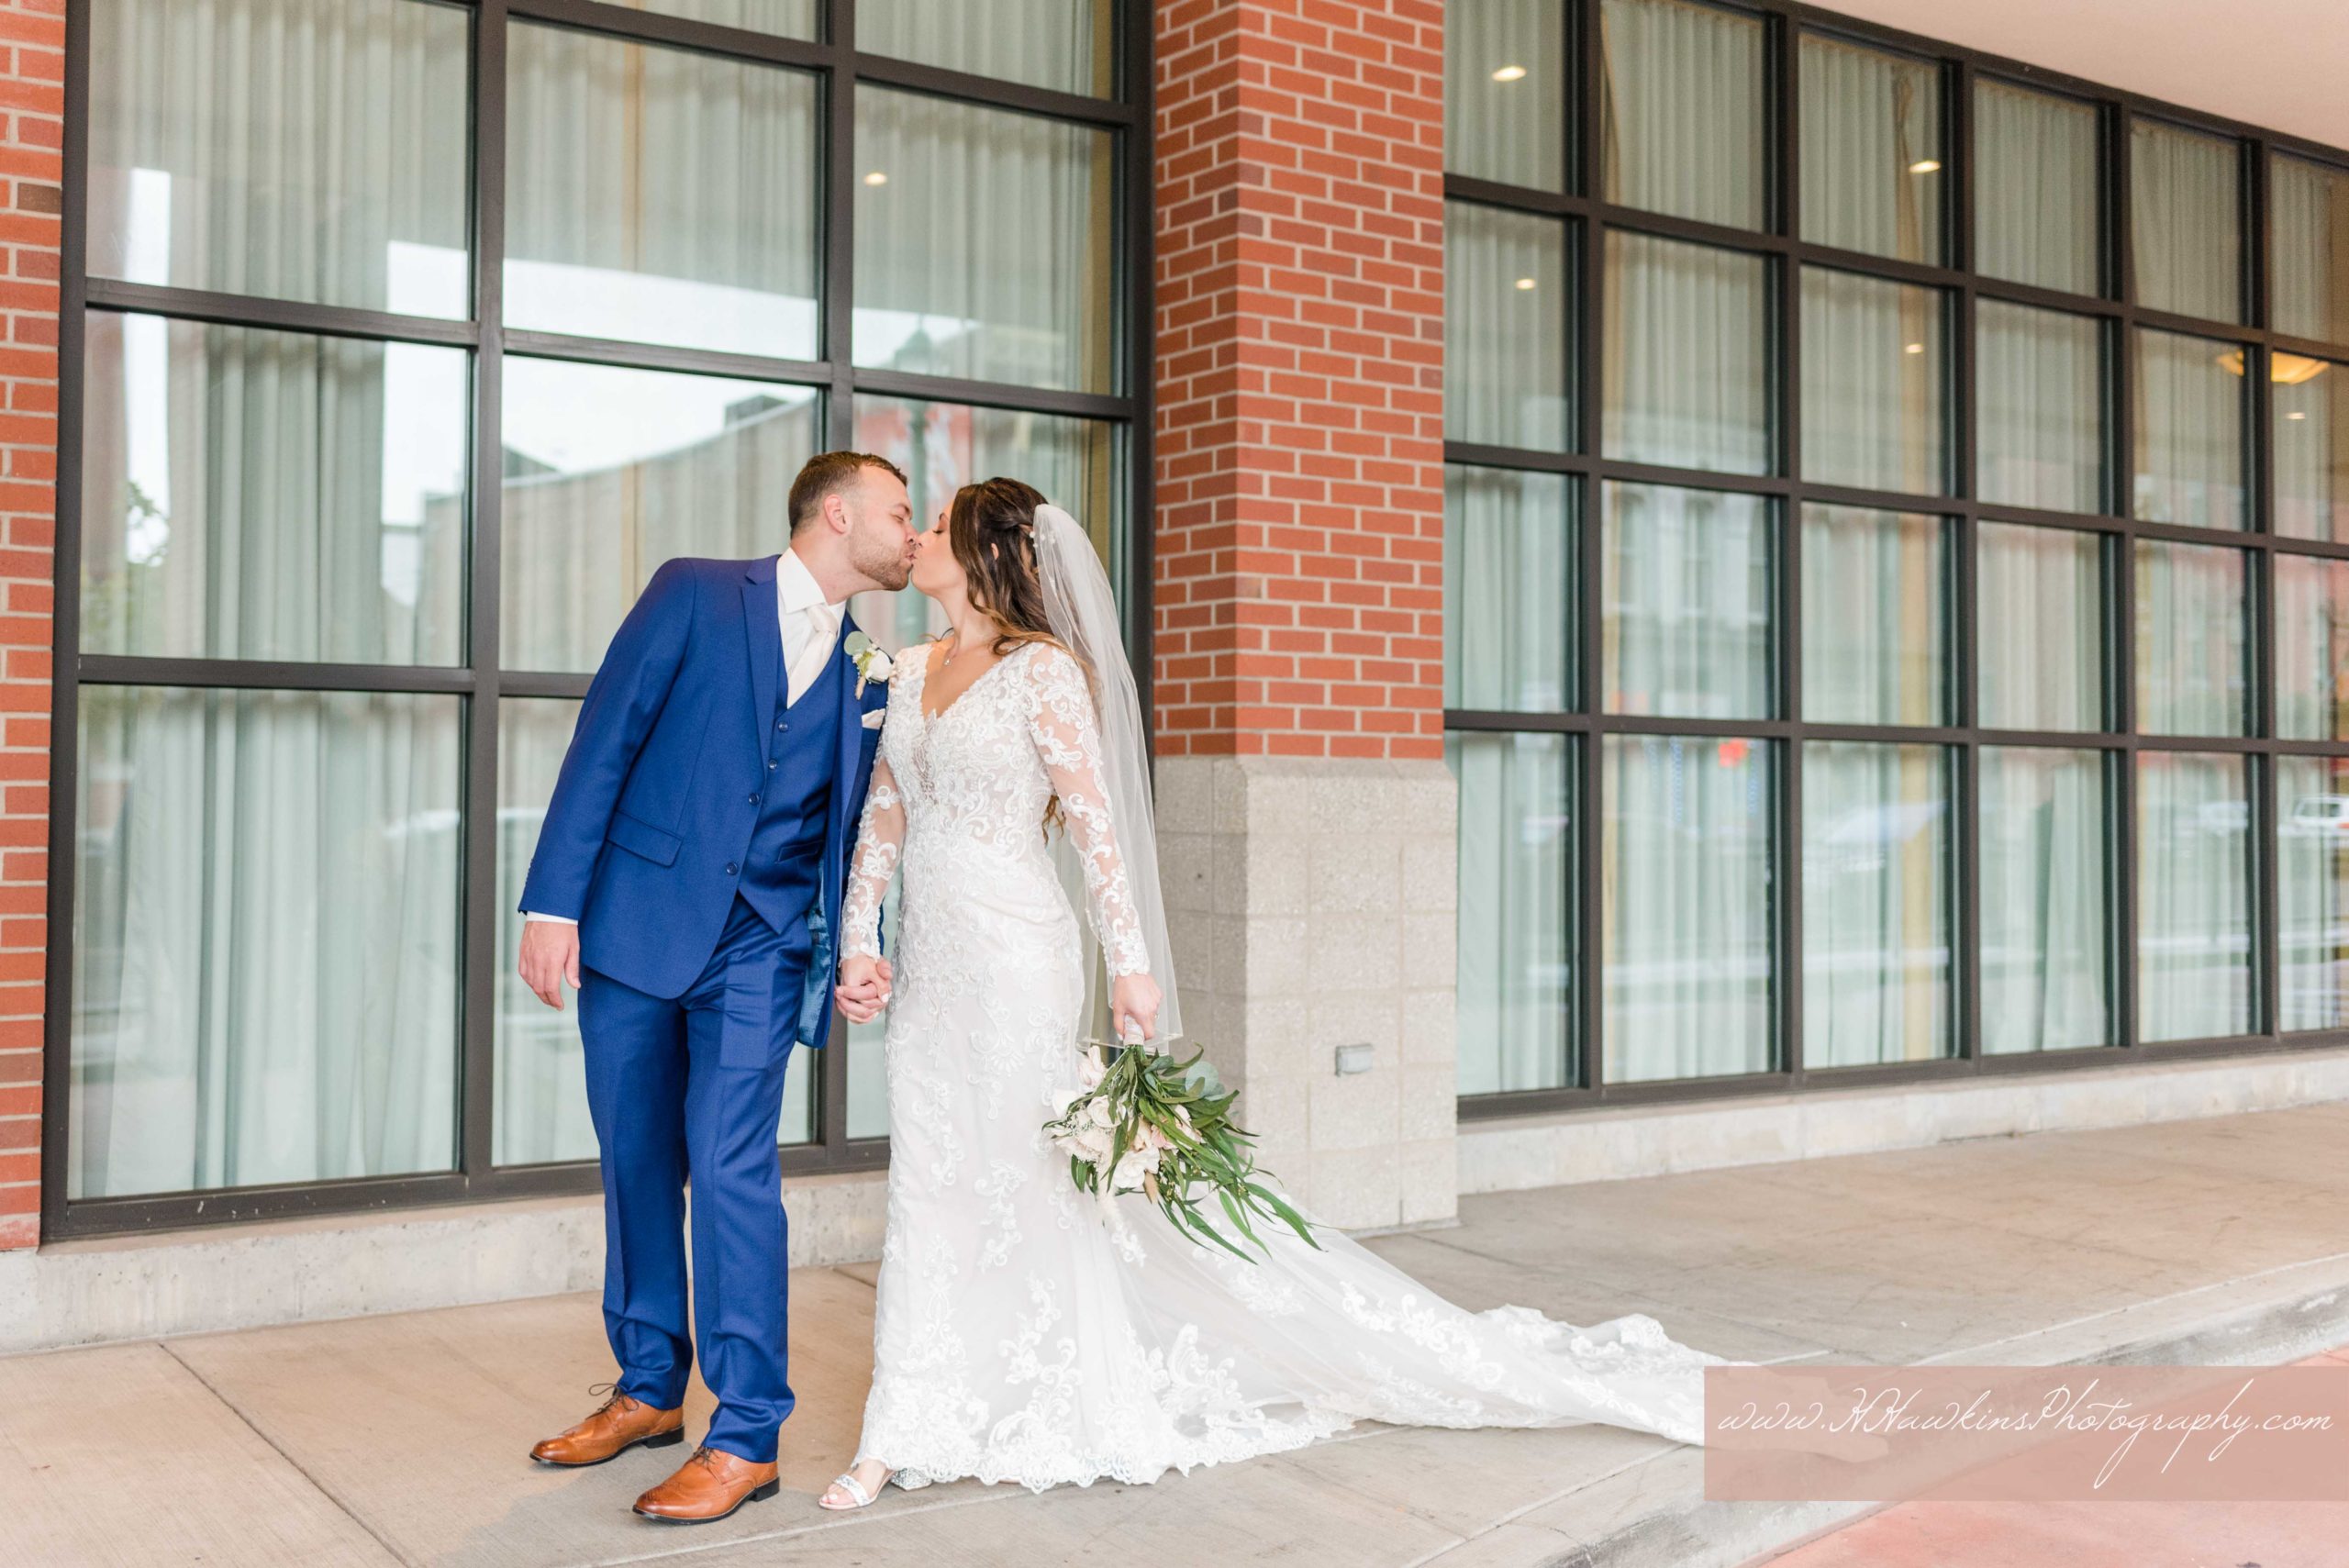 Portraits of bride in lace Kitty Chen dress and groom in navy blue suit with a brick background in the Porte-cochère of the Courtyard Marriott in Armory Square in downtown Syracuse